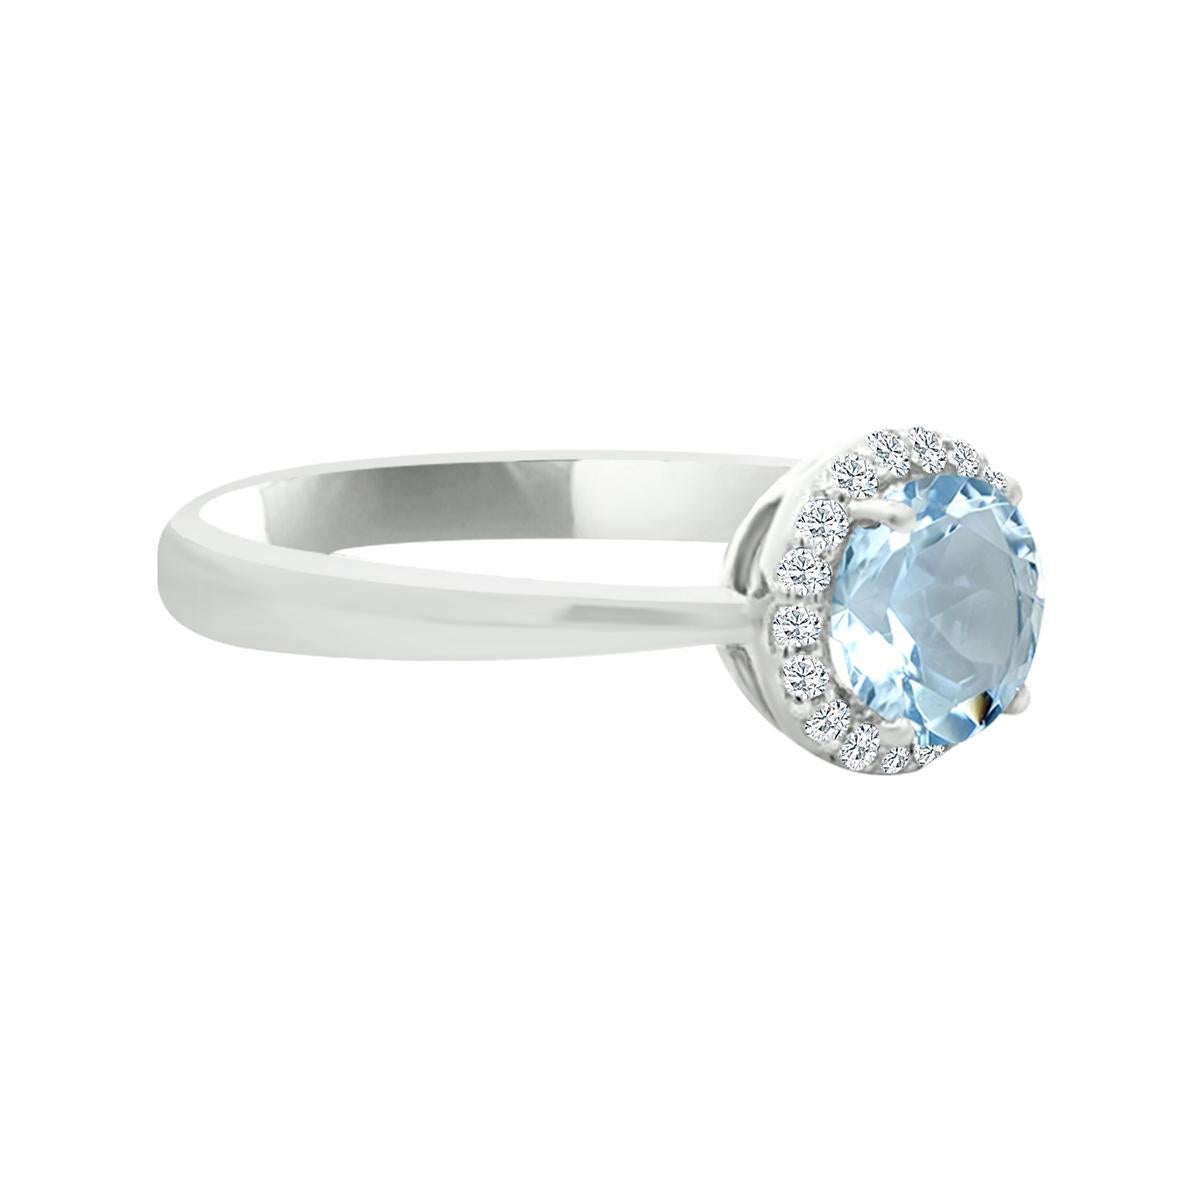 These Elegant And Feminine Aquamarine Ring Features A 6MM Round Shape natural Aquamarine And Round Diamonds Set In Solid 14K White Gold Ring Setting.
The Timeless And Classic Design Of This Aquamarine Gemstone Ring Will Make Your Engagement